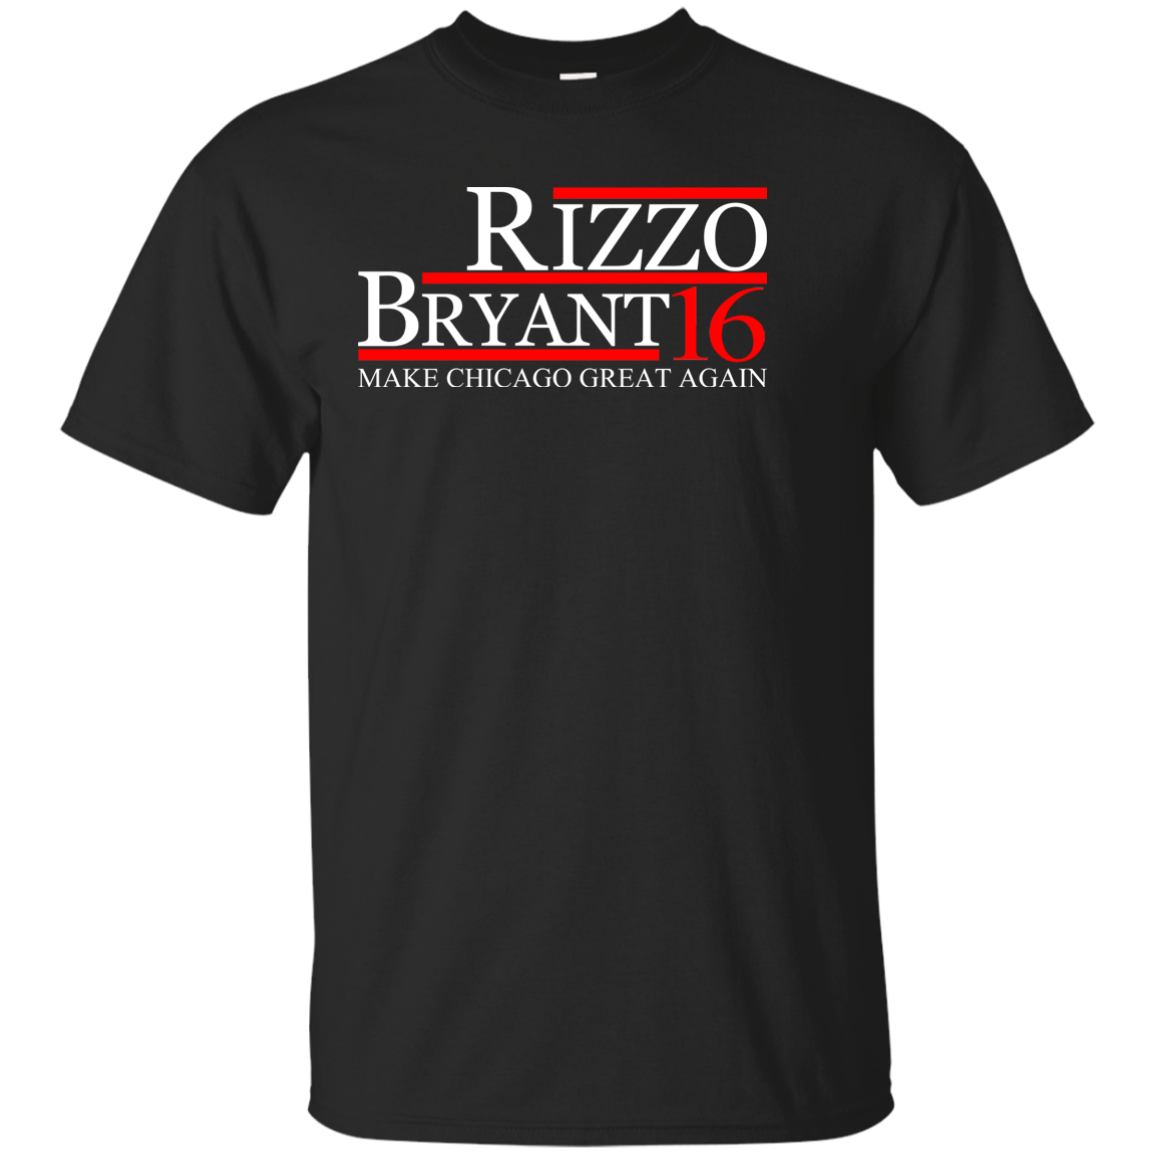 Rizzo Bryant 2016 Tees/Hoodies/Tanks for President - ifrogtees